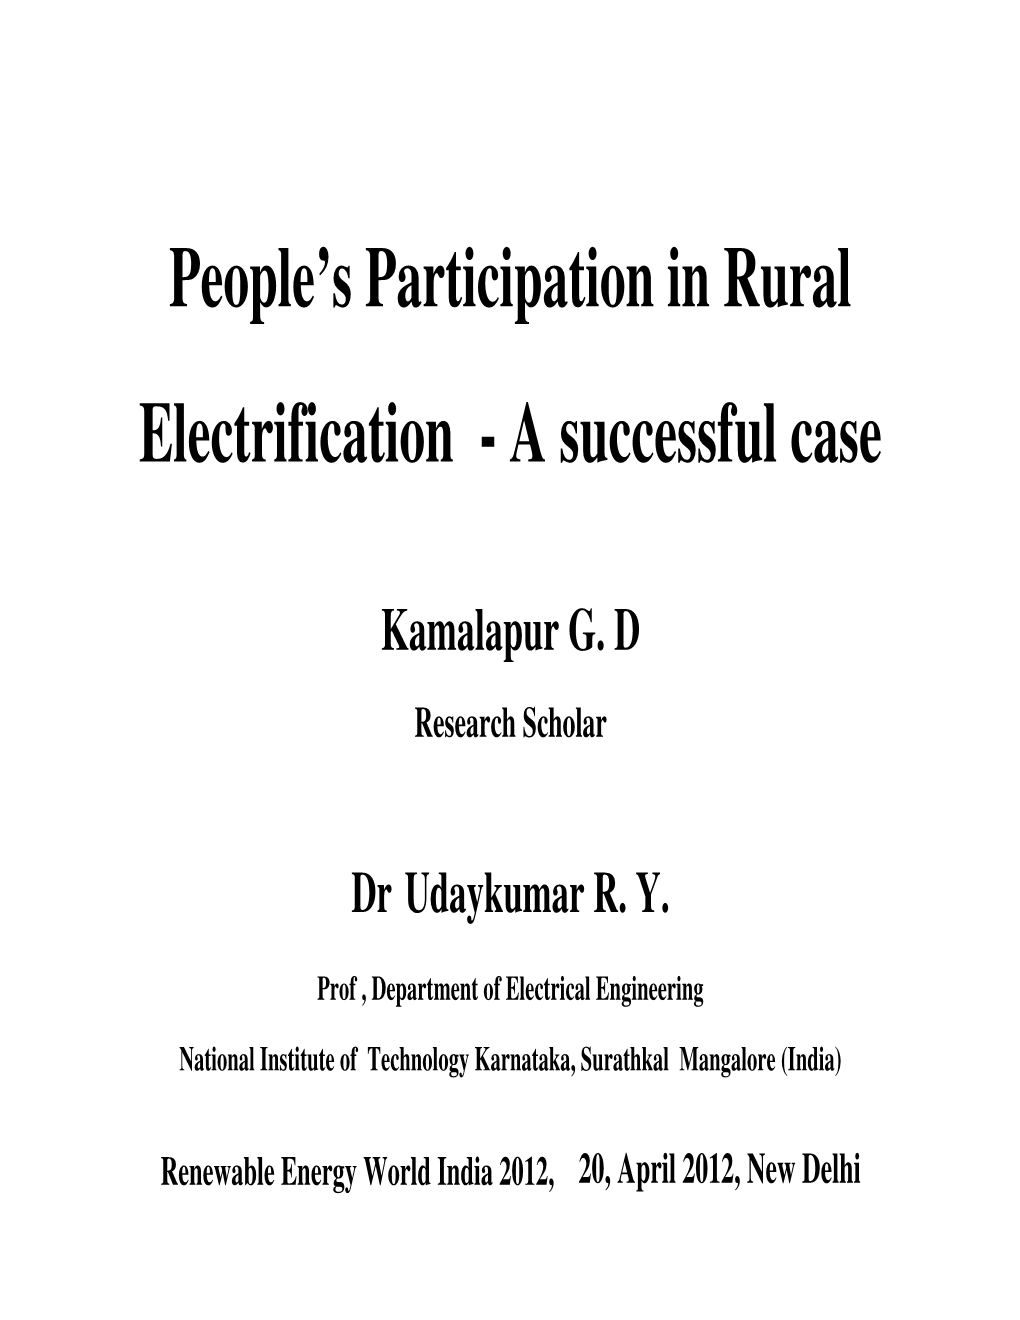 People's Participation in Rural Electrification